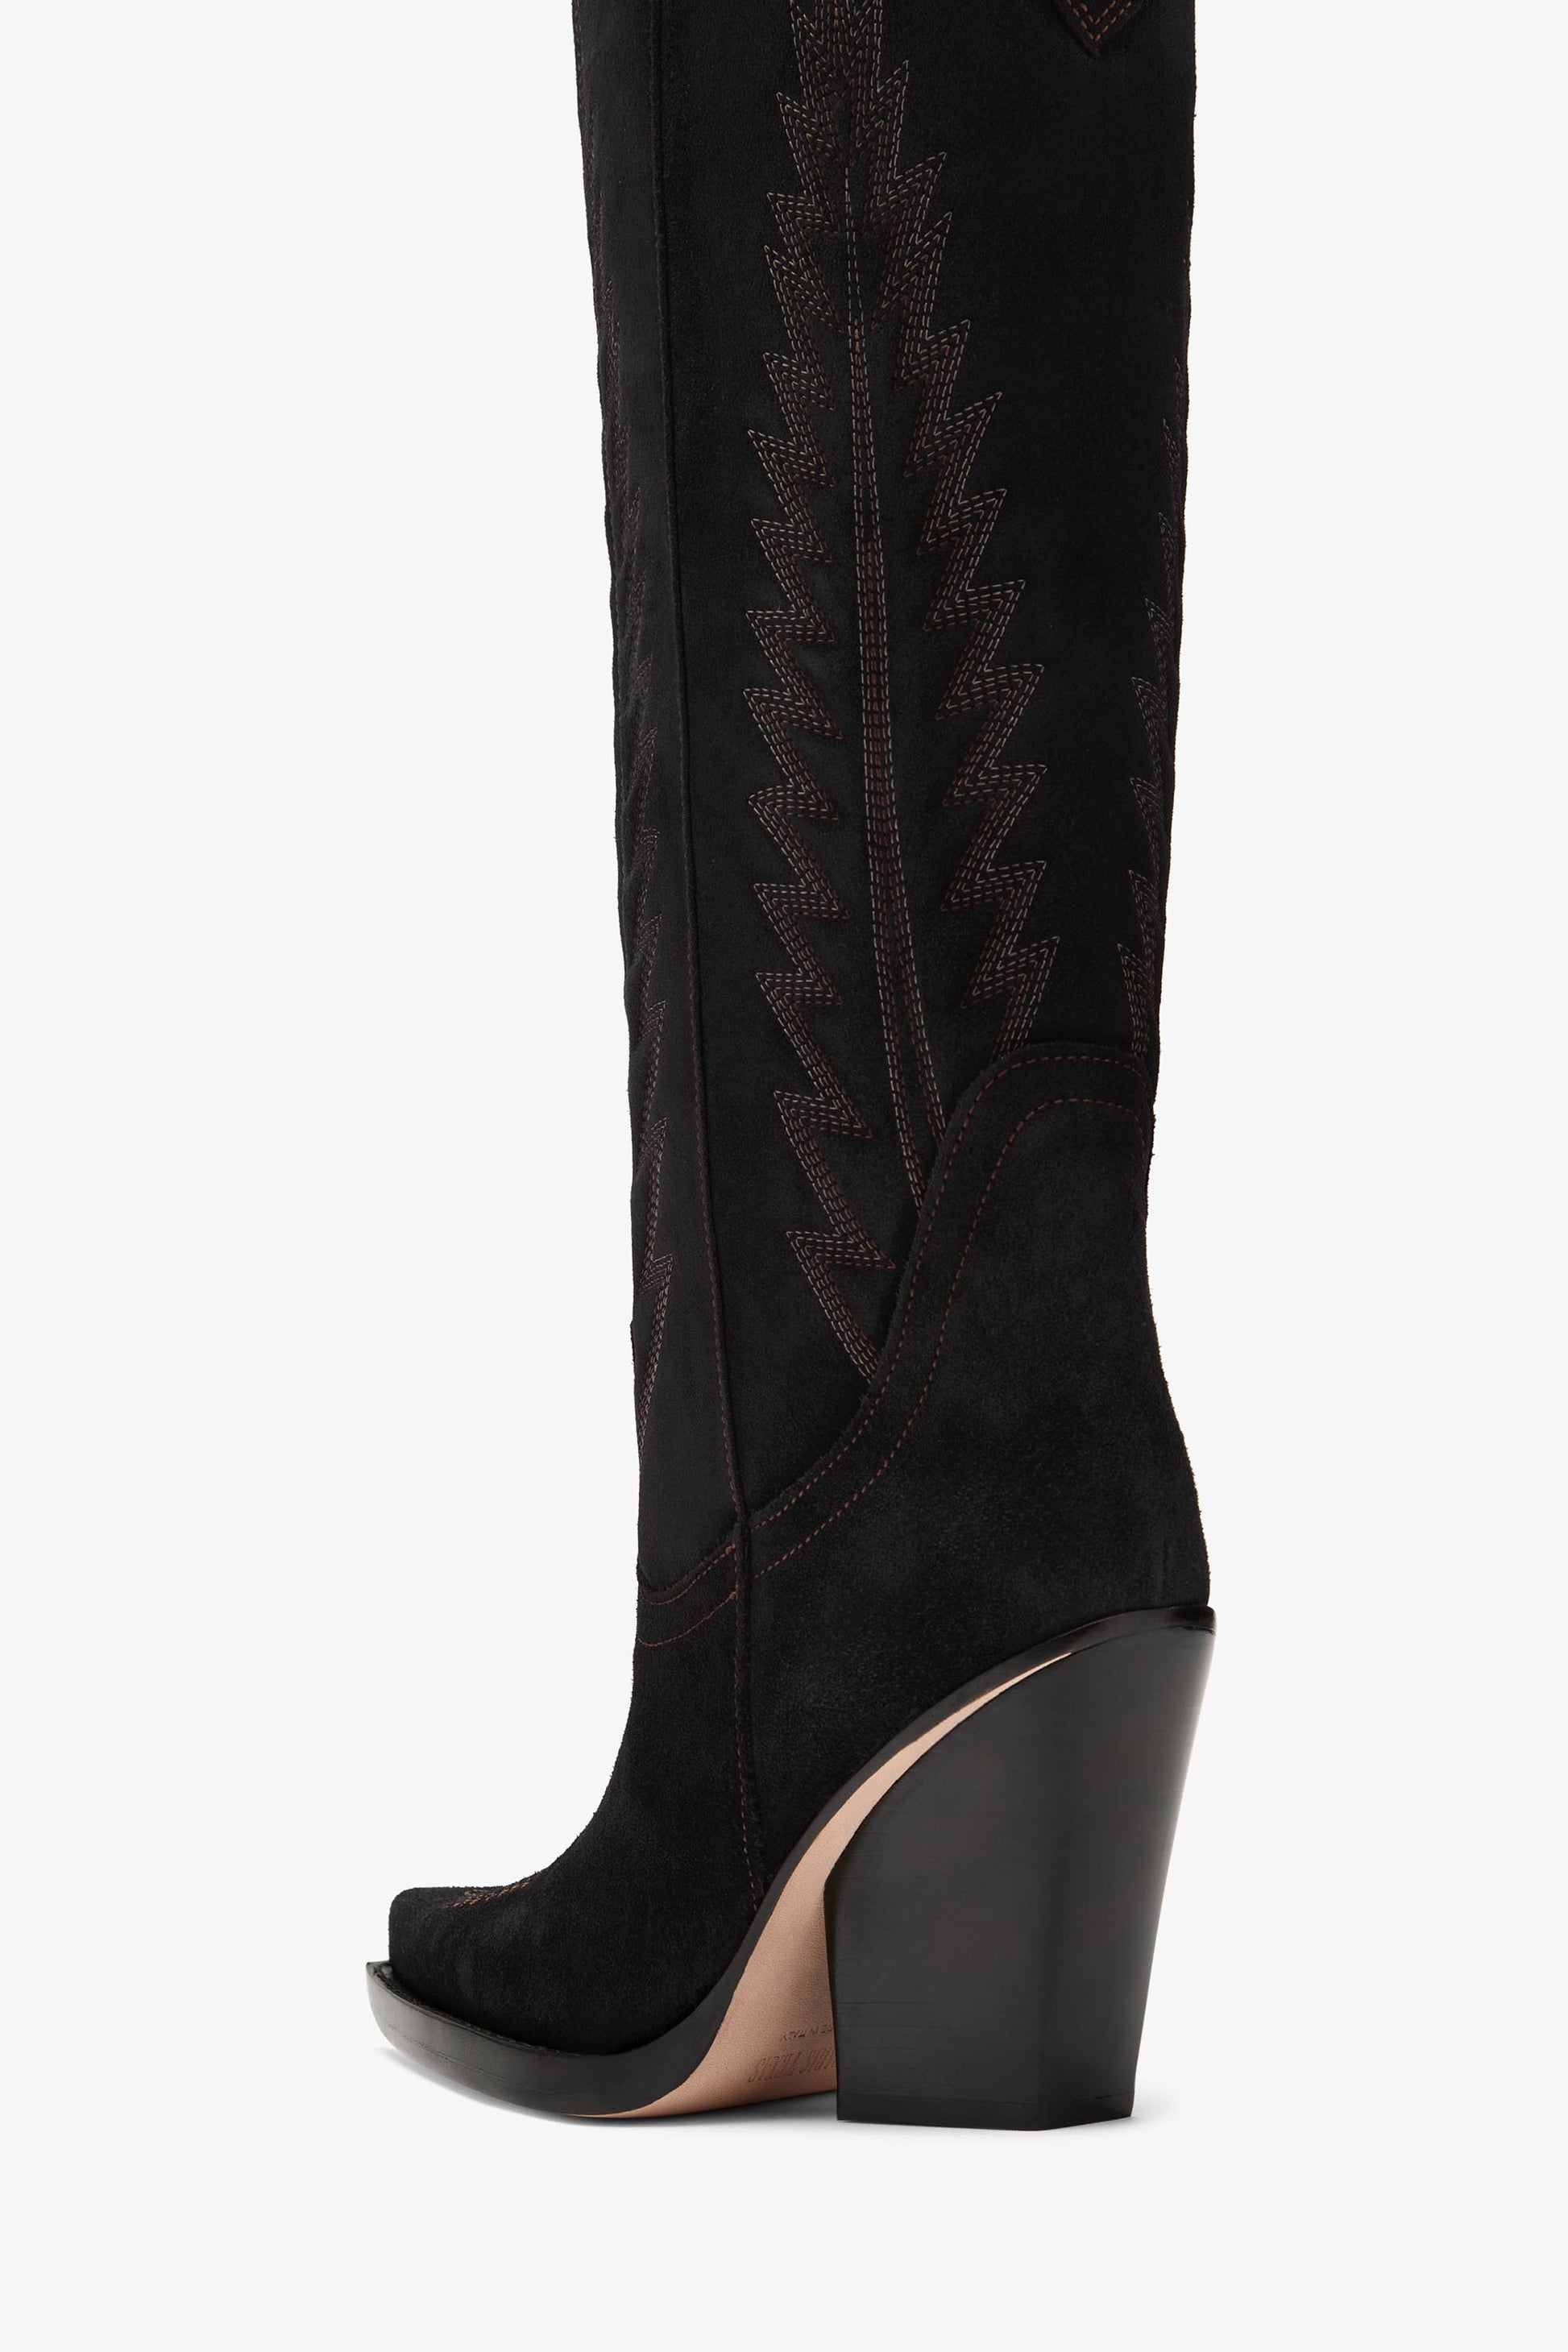 Black suede embroidered Texan boot